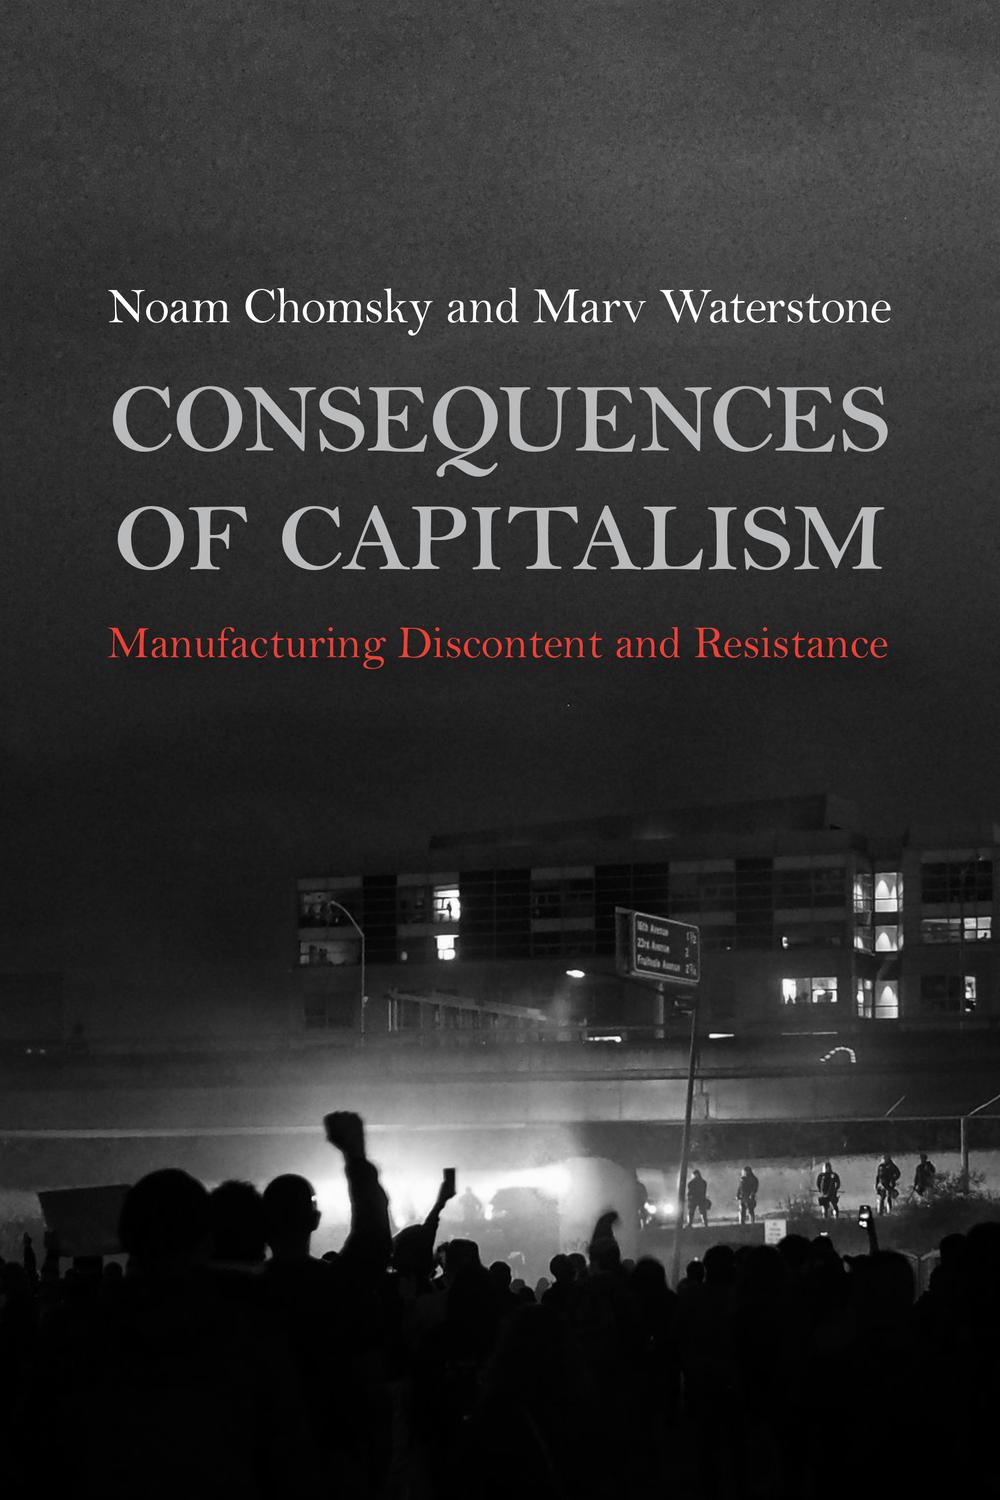 Noam Chomsky, Marv Waterstone: Consequences of Capitalism (Paperback, 2021, Haymarket Books)